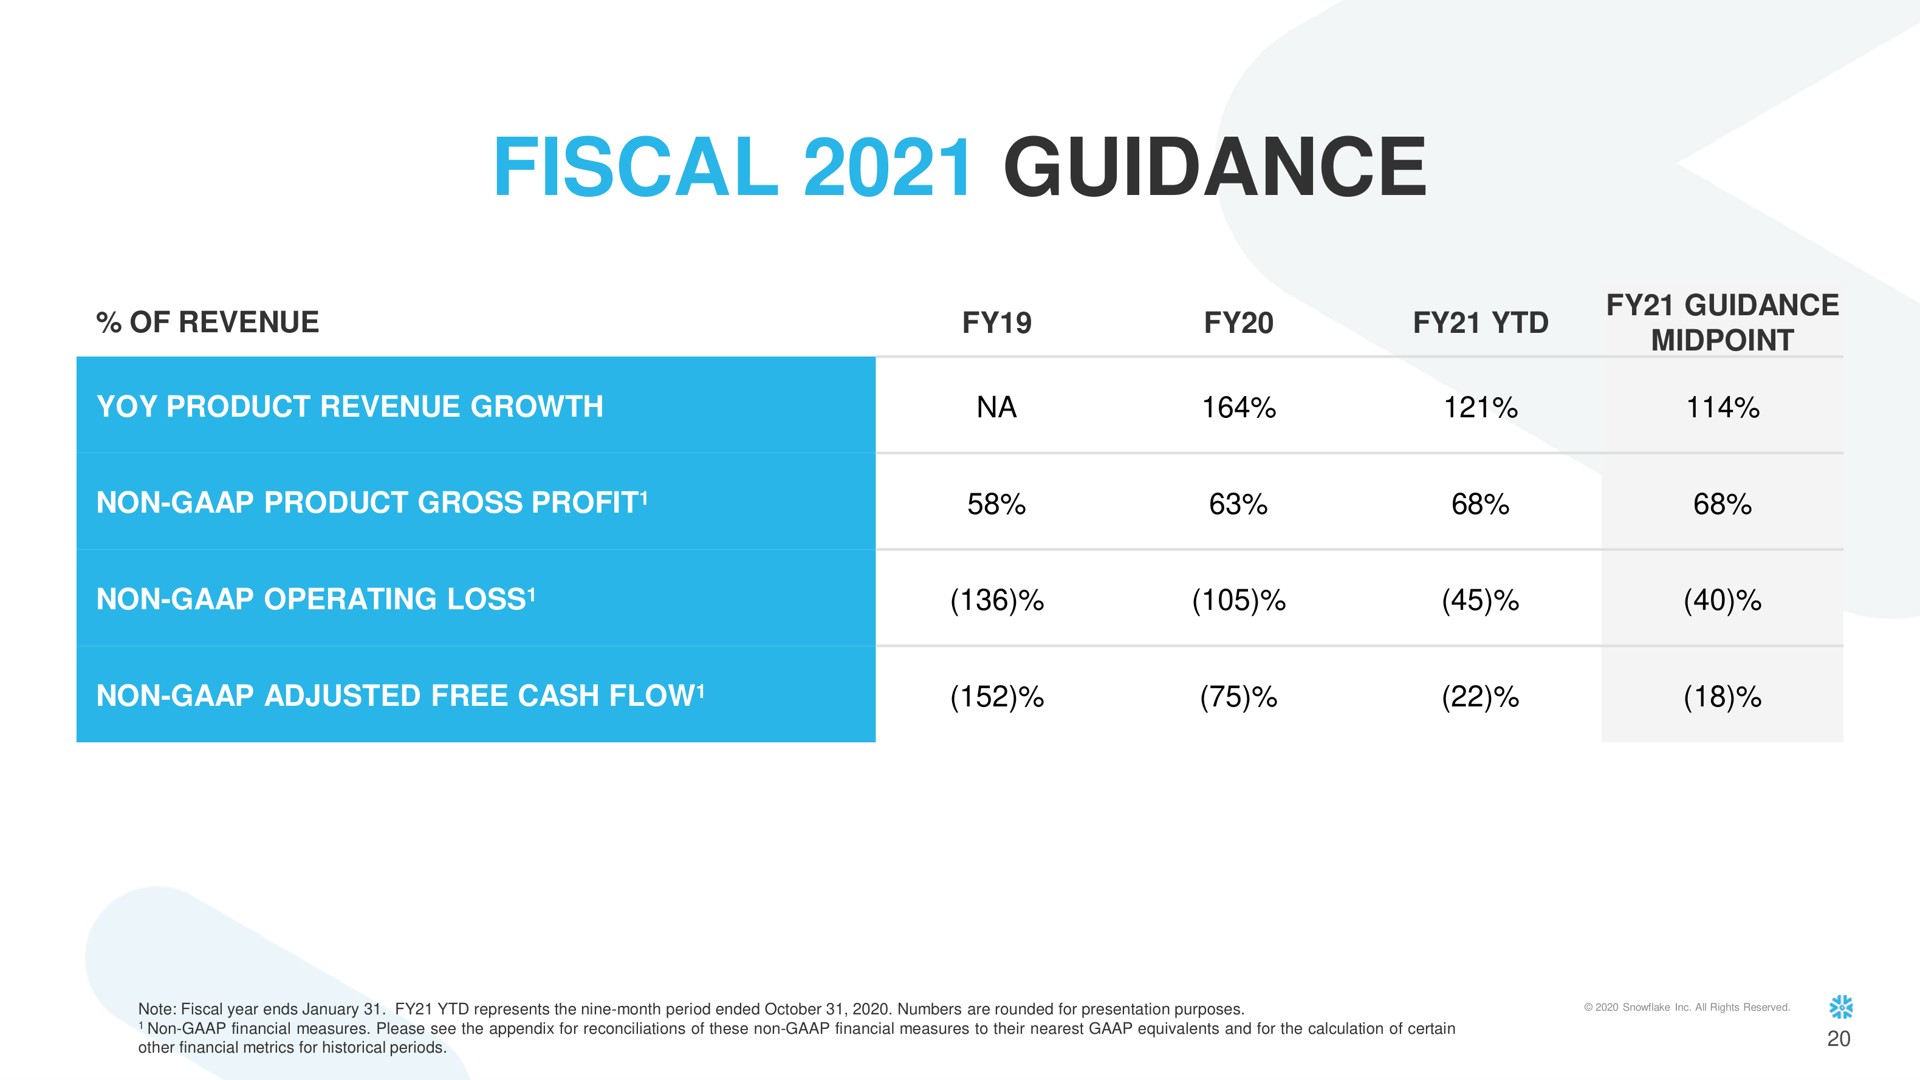 fiscal guidance | Snowflake